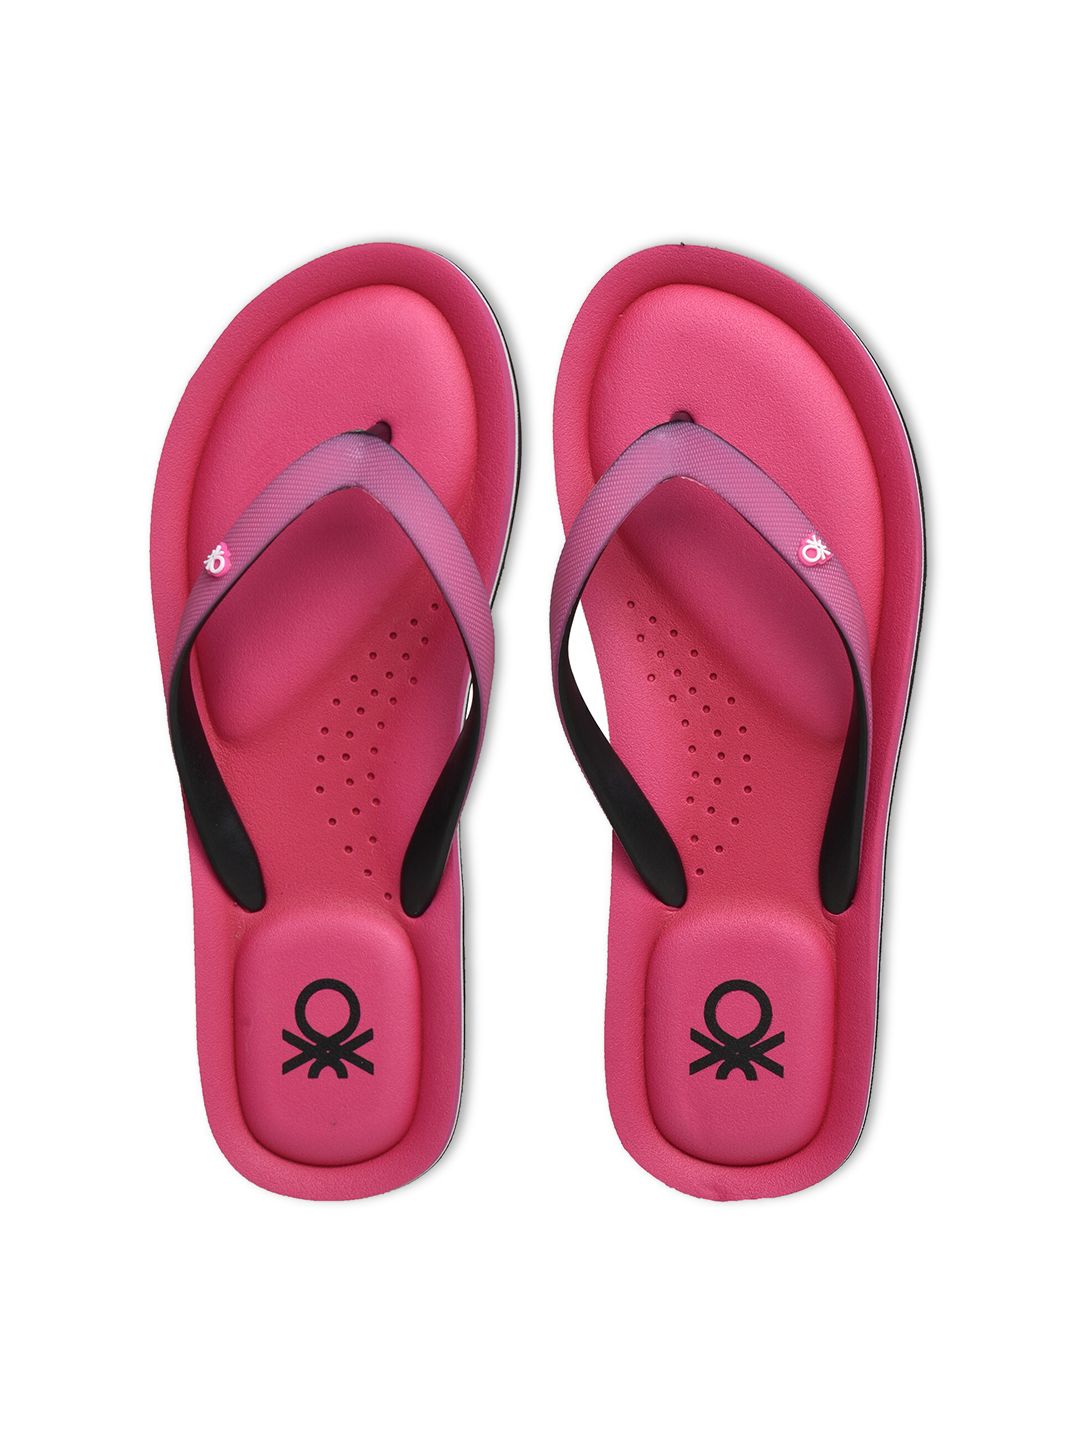 United Colors of Benetton Women Pink Printed Rubber Thongs Flip Flop Price in India